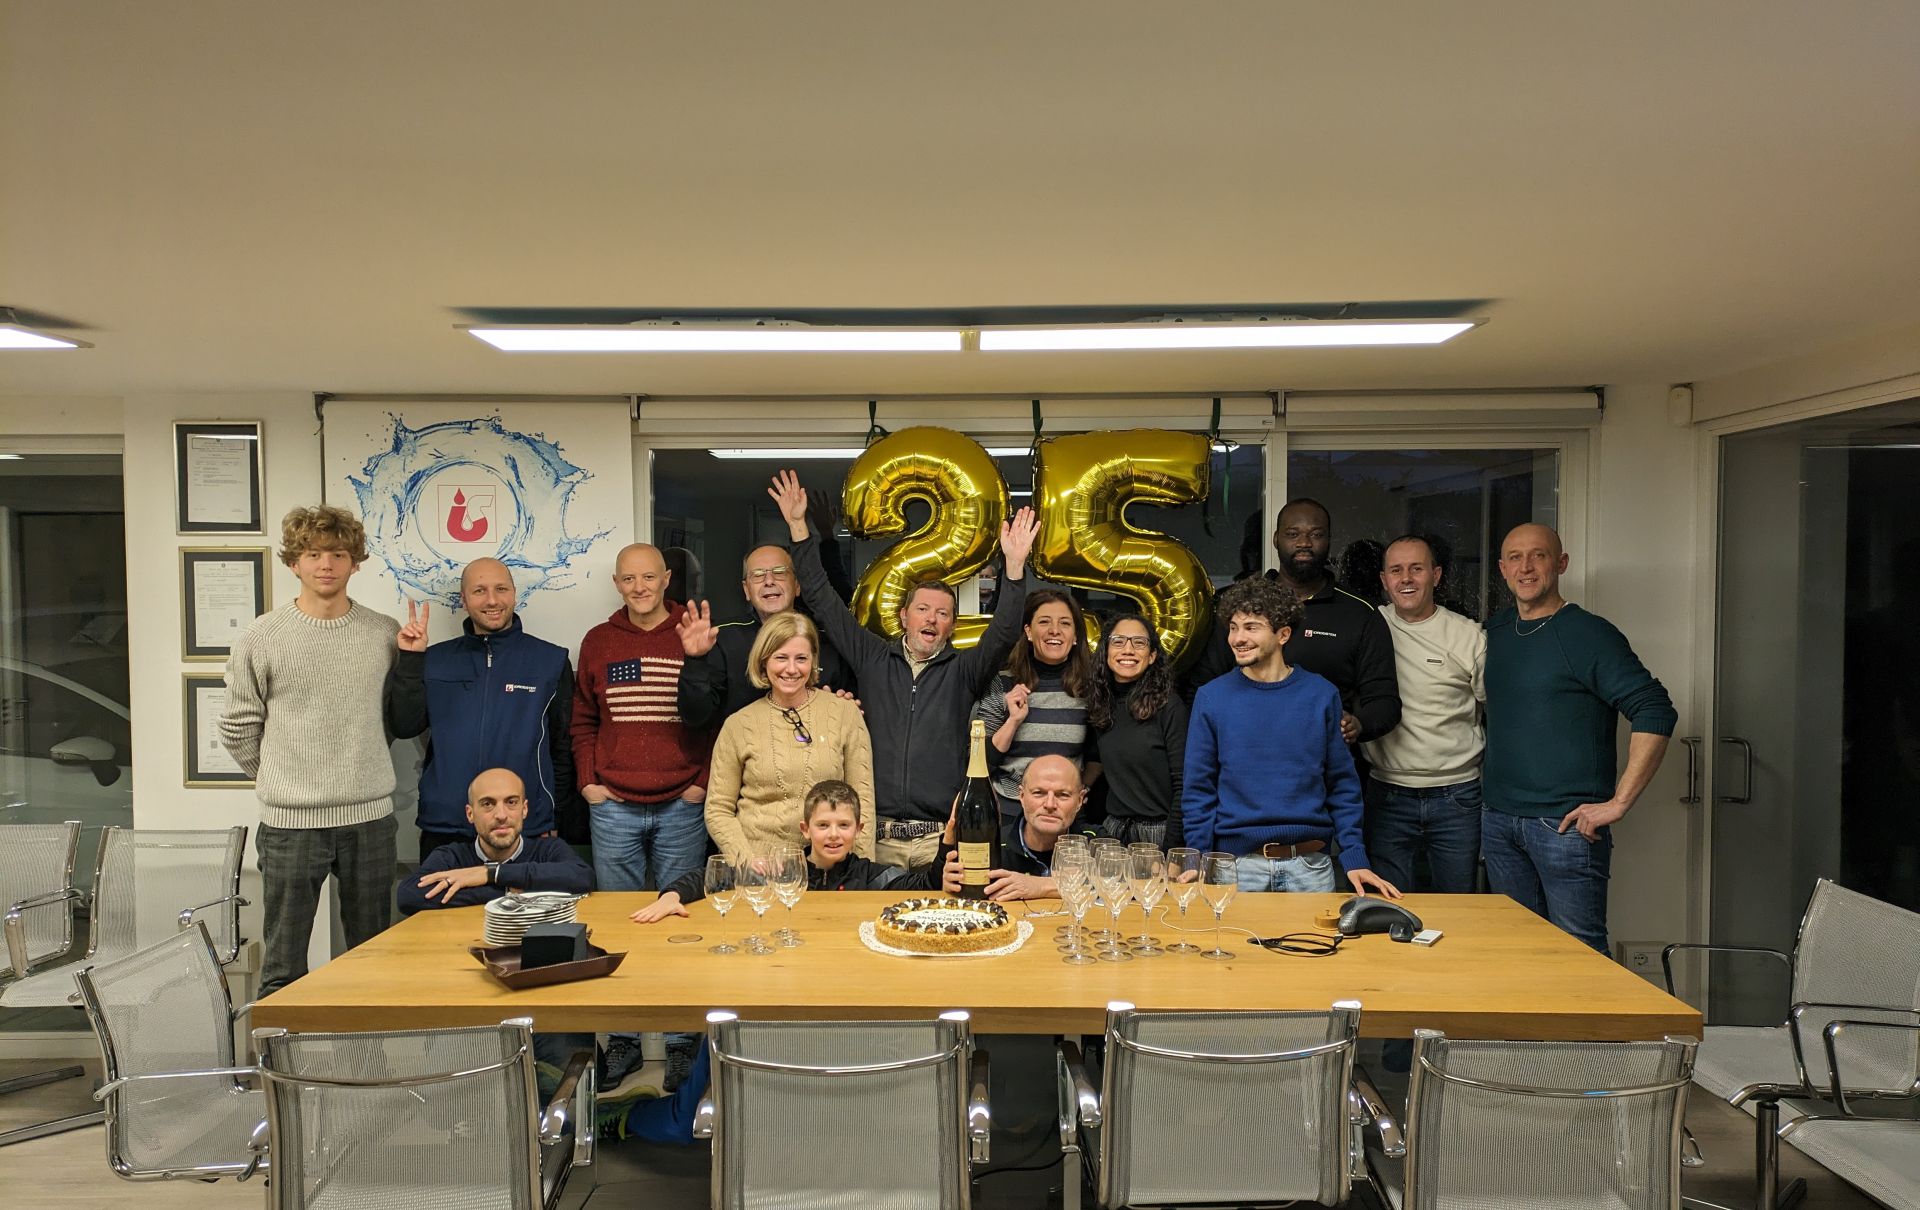 OUR 25TH ANNIVERSARY <br />
CELEBRATION !!